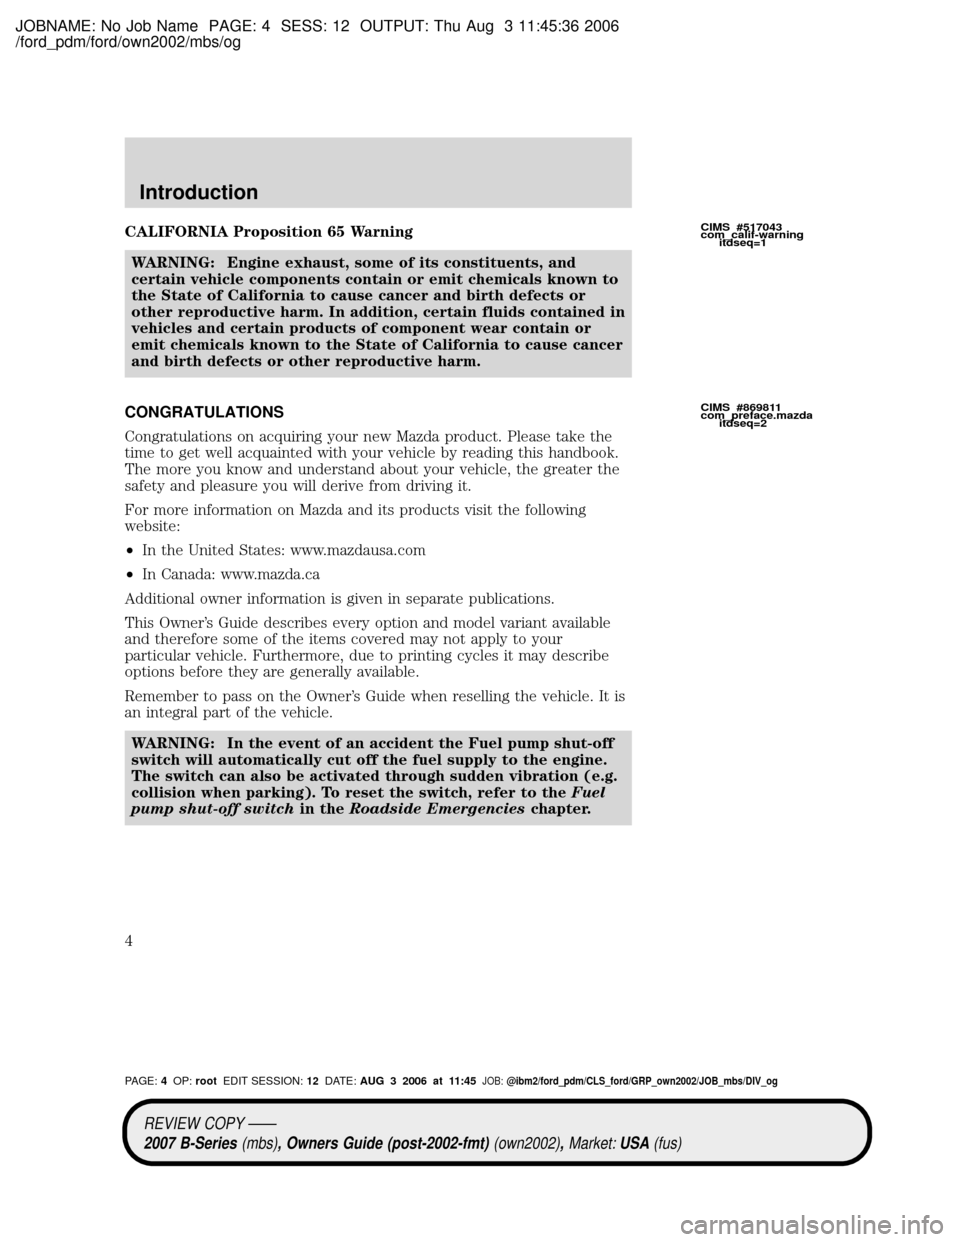 MAZDA MODEL B2300 TRUCK 2007  Owners Manual (in English) JOBNAME: No Job Name PAGE: 4 SESS: 12 OUTPUT: Thu Aug 3 11:45:36 2006
/ford_pdm/ford/own2002/mbs/og
CALIFORNIA Proposition 65 Warning
WARNING: Engine exhaust, some of its constituents, and
certain veh